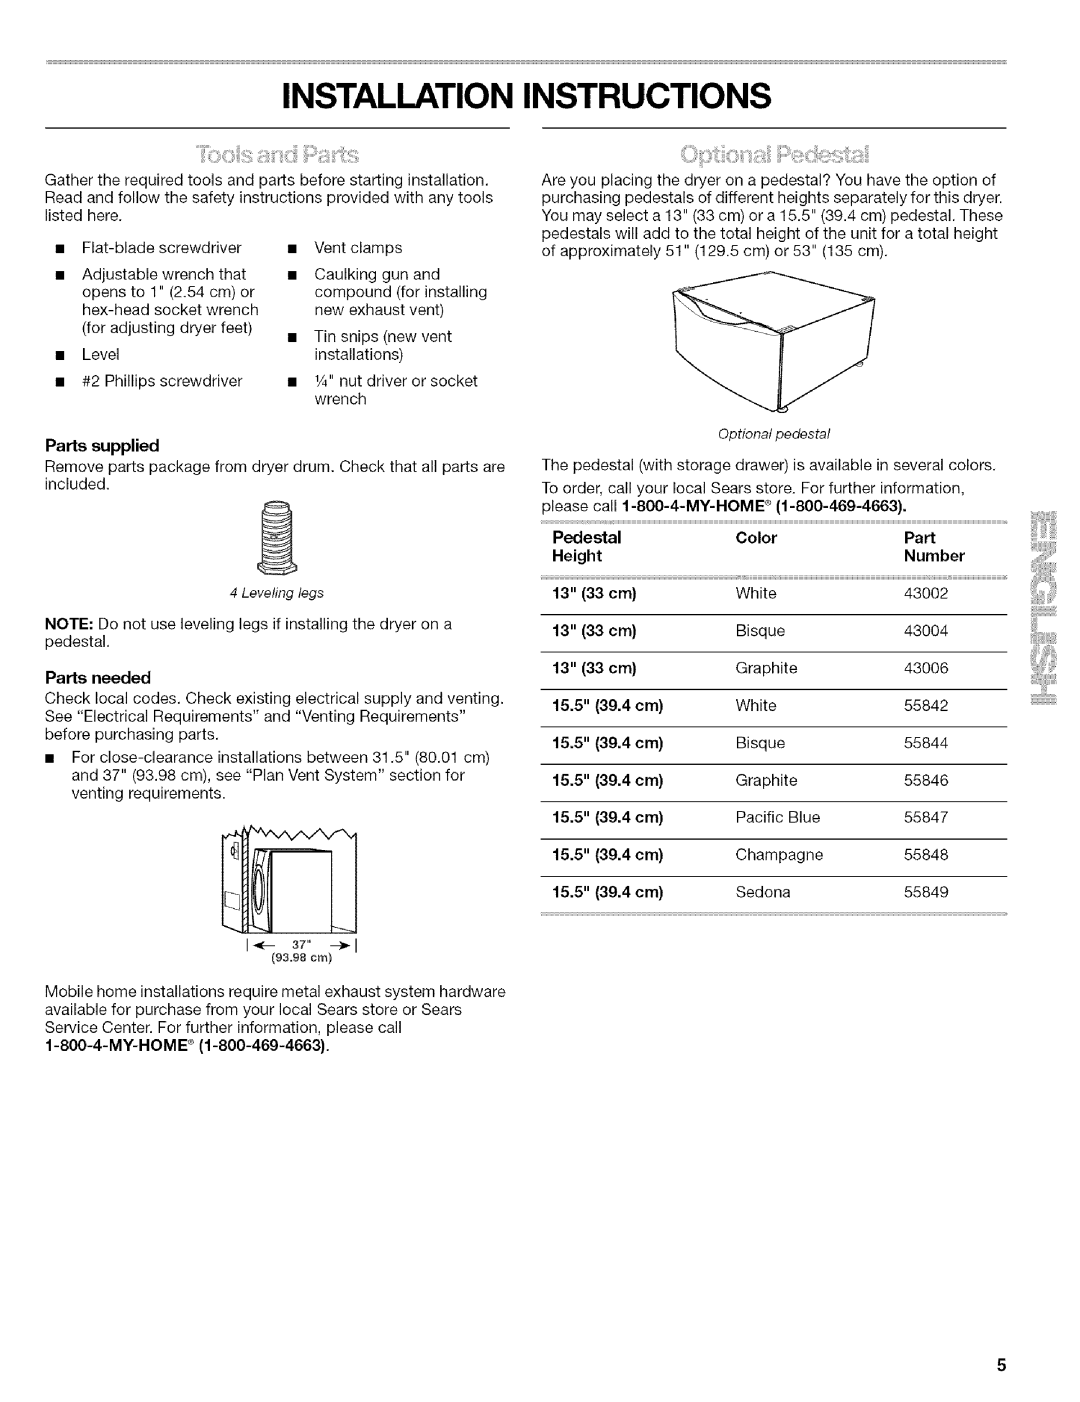 Kenmore 110.C8508, C8587, C8586 manual Installation Instructions, Parts supplied, Parts needed, Pedestal, Color, Height, 15.5 